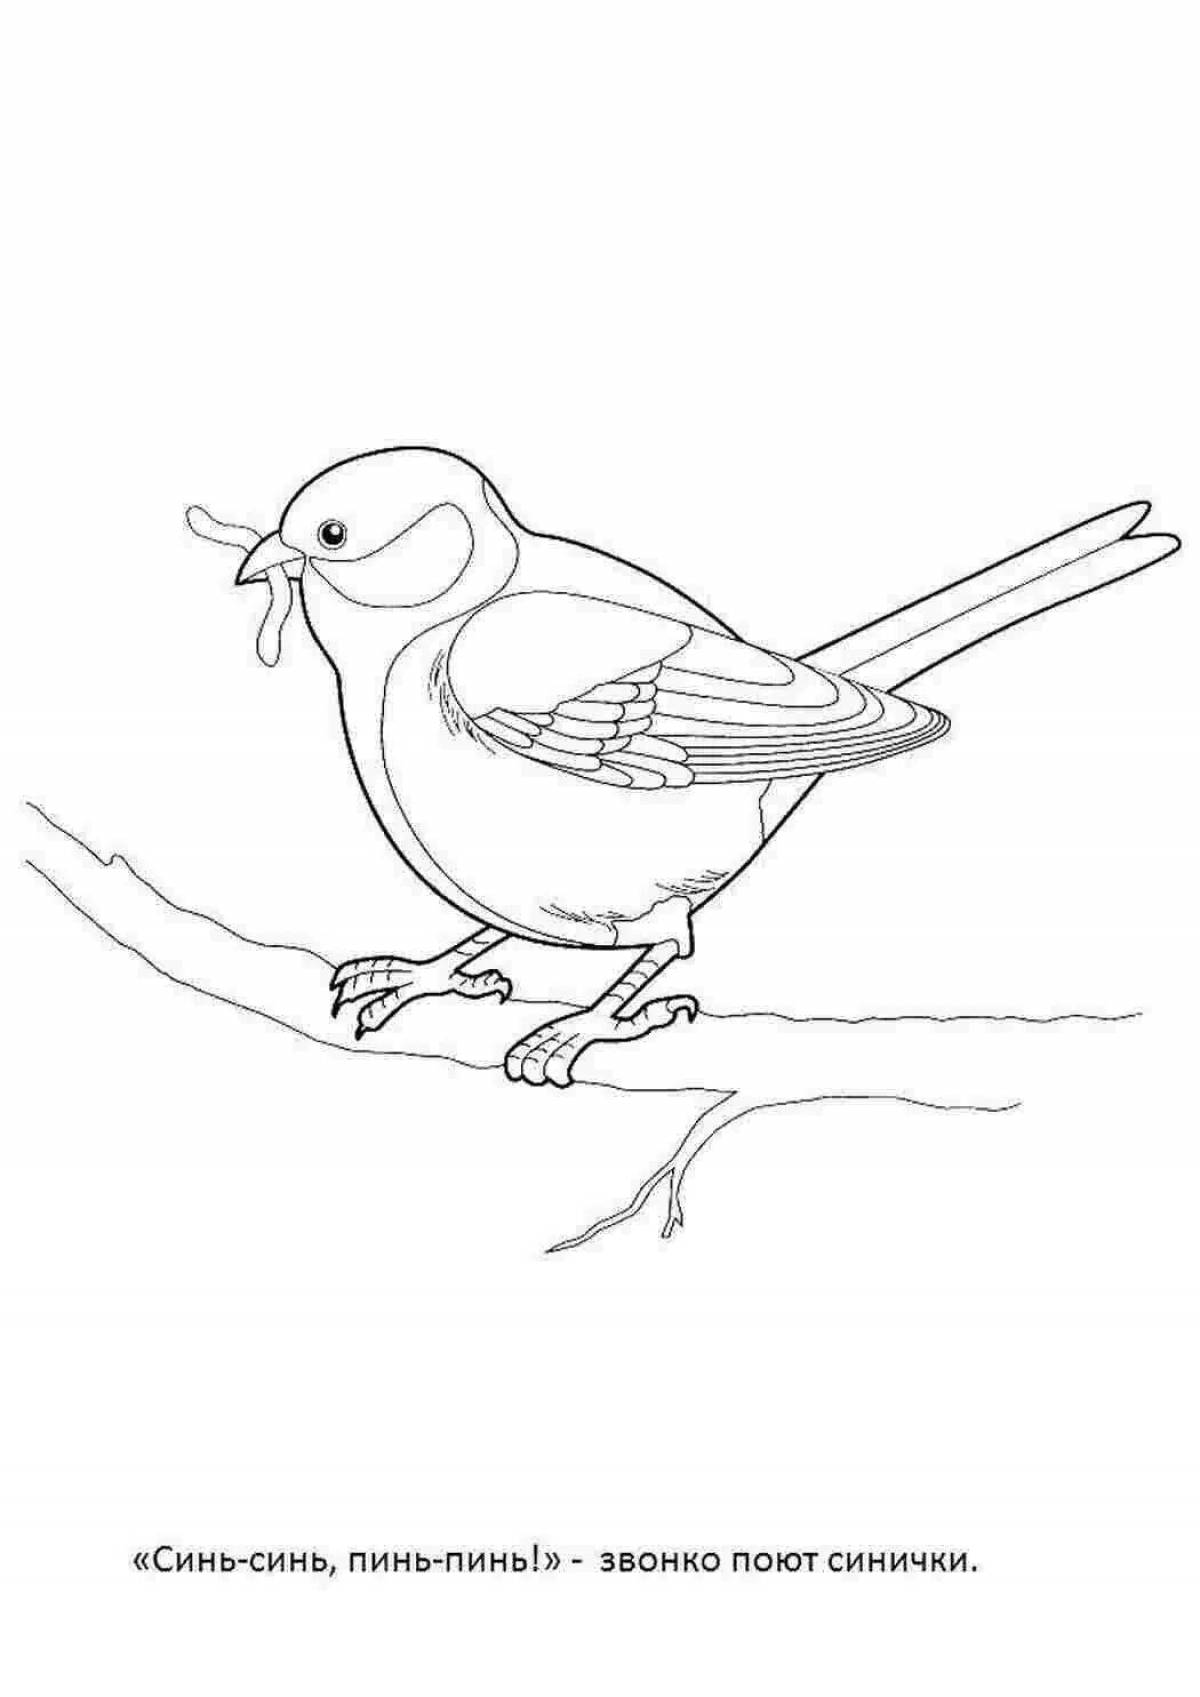 Coloring page lucky tit, wintering bird